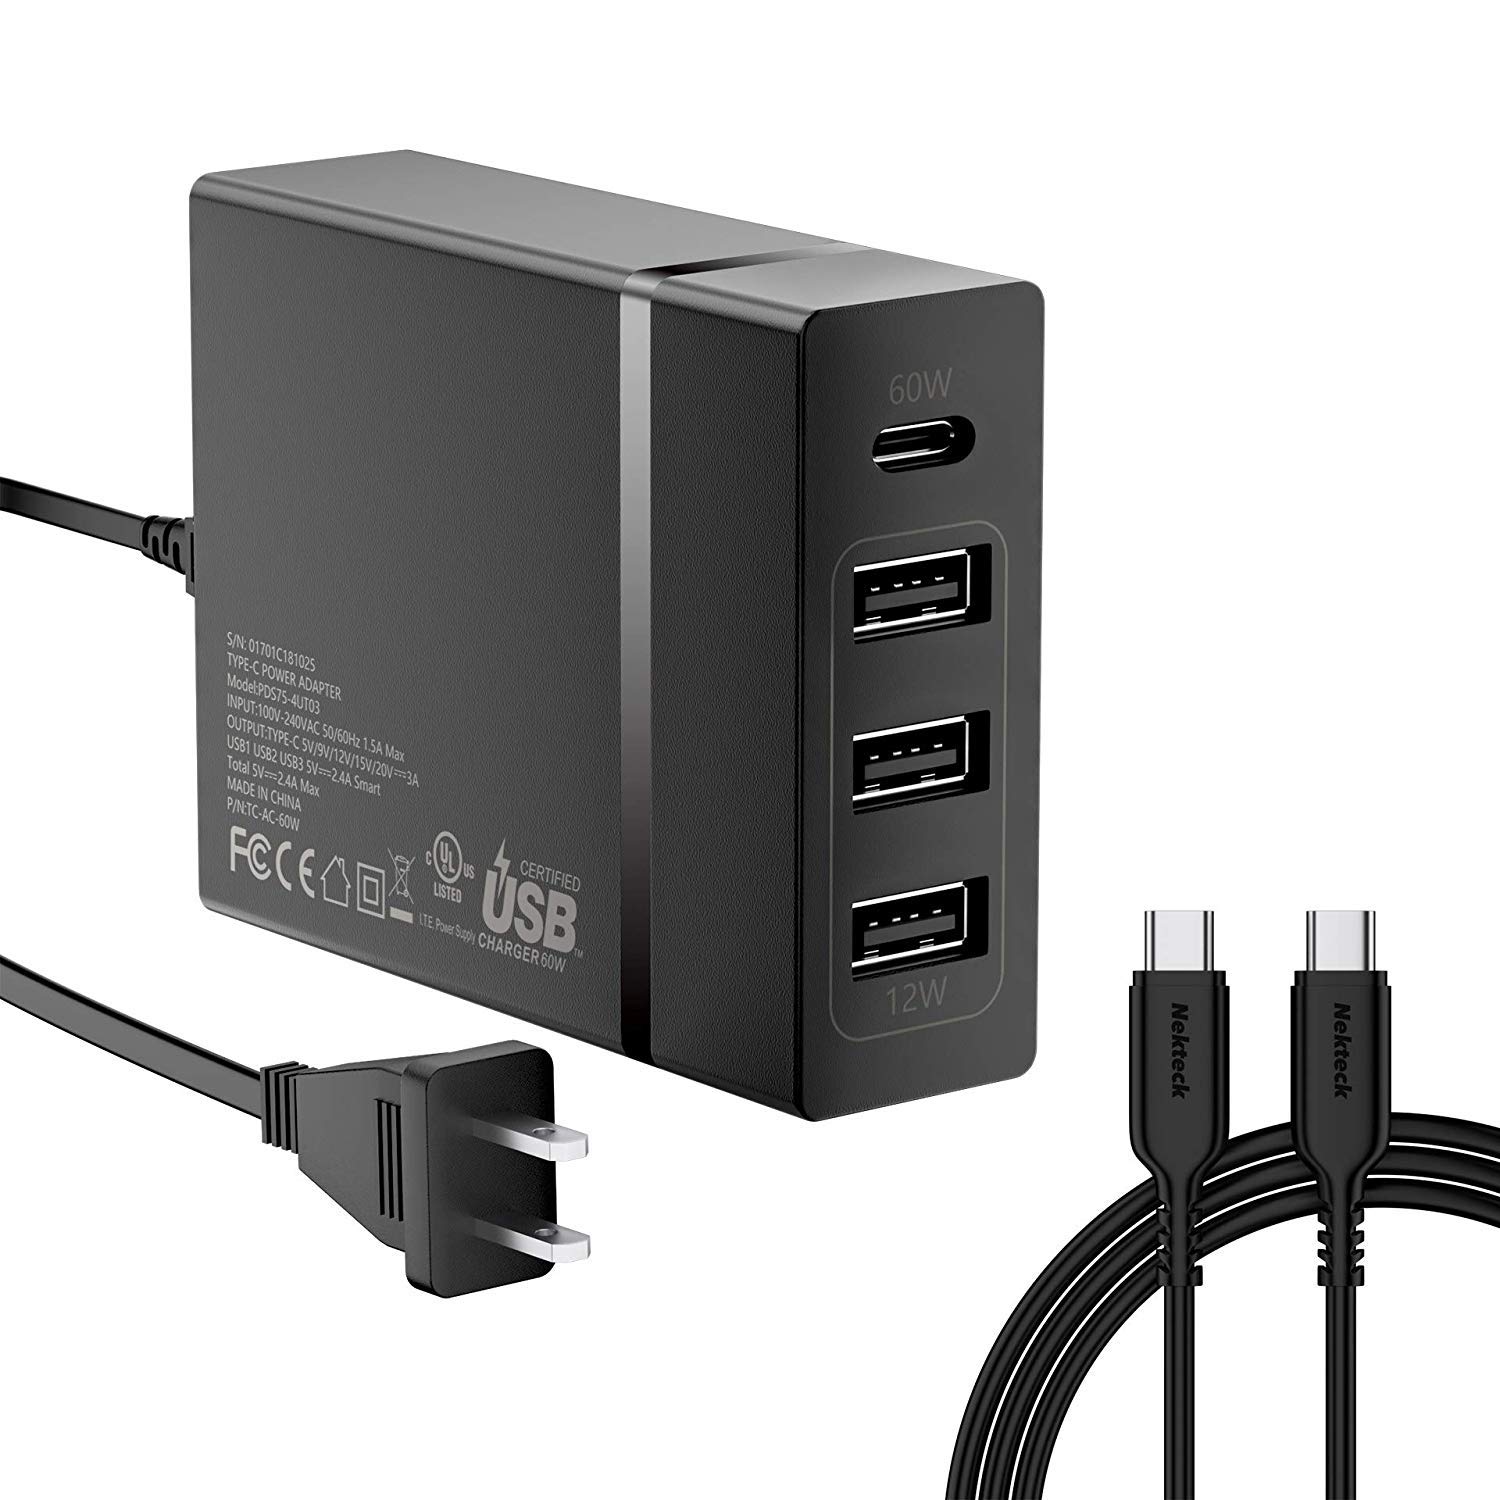 Book Cover USB C Charger, Nekteck 4-Port 72W USB Wall Charger with Type-C 60W Power Delivery PD Charger Station Compatible with iPhone 12 Pro Max, MacBook Pro, iPad Pro, Dell XPS, Surface Go, Pixel(Black)